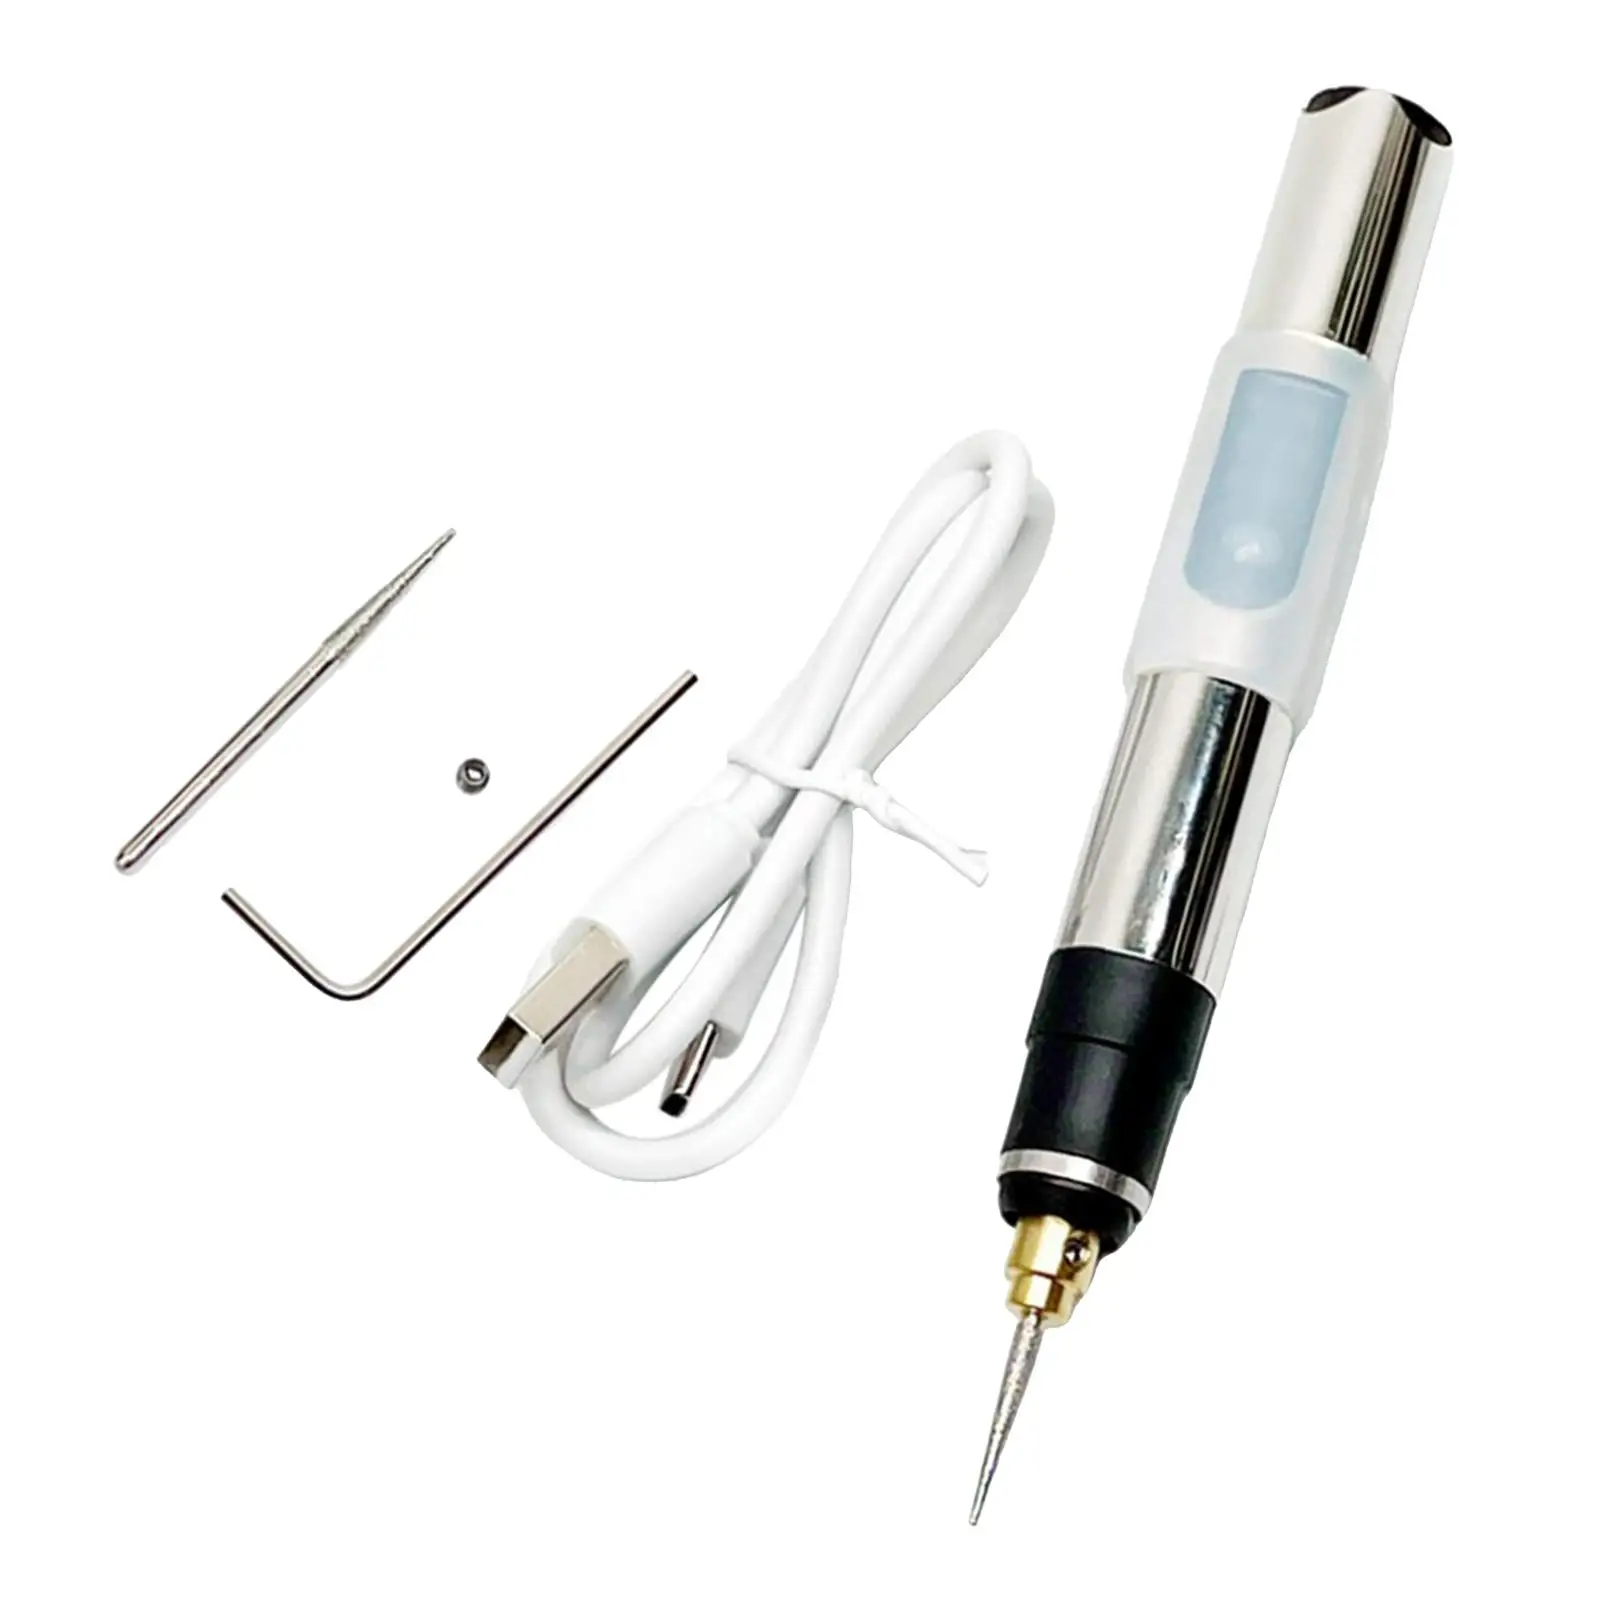 Electric Etching Pen Adjustable Speed Cutter Tool Engraving Tool Kit for Jewelry/ Wood/ Glass/ Ceramic/ Metal